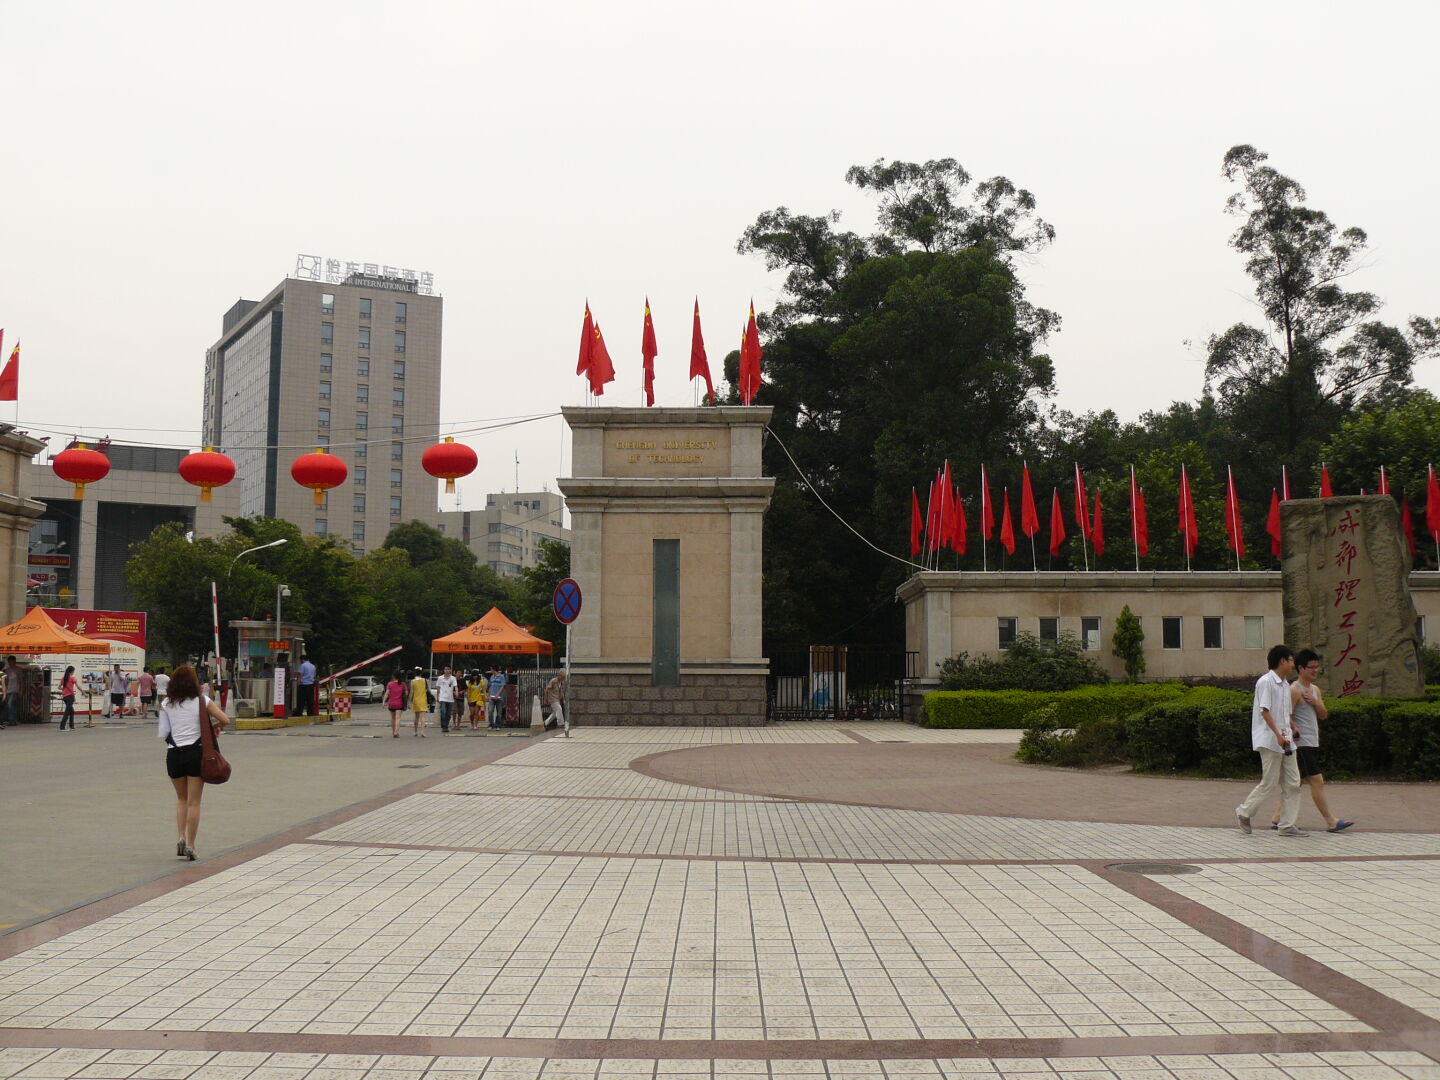 I finished my tour in the Chengdu Bookworm, where I had an ice chocolate, a cheeseburger (delicious!) and some Jasmine tea, before I took a taxi  back to the Chengdu University of Technology (paying only 26 Yuan this time). This is the main entrance of the Campus.